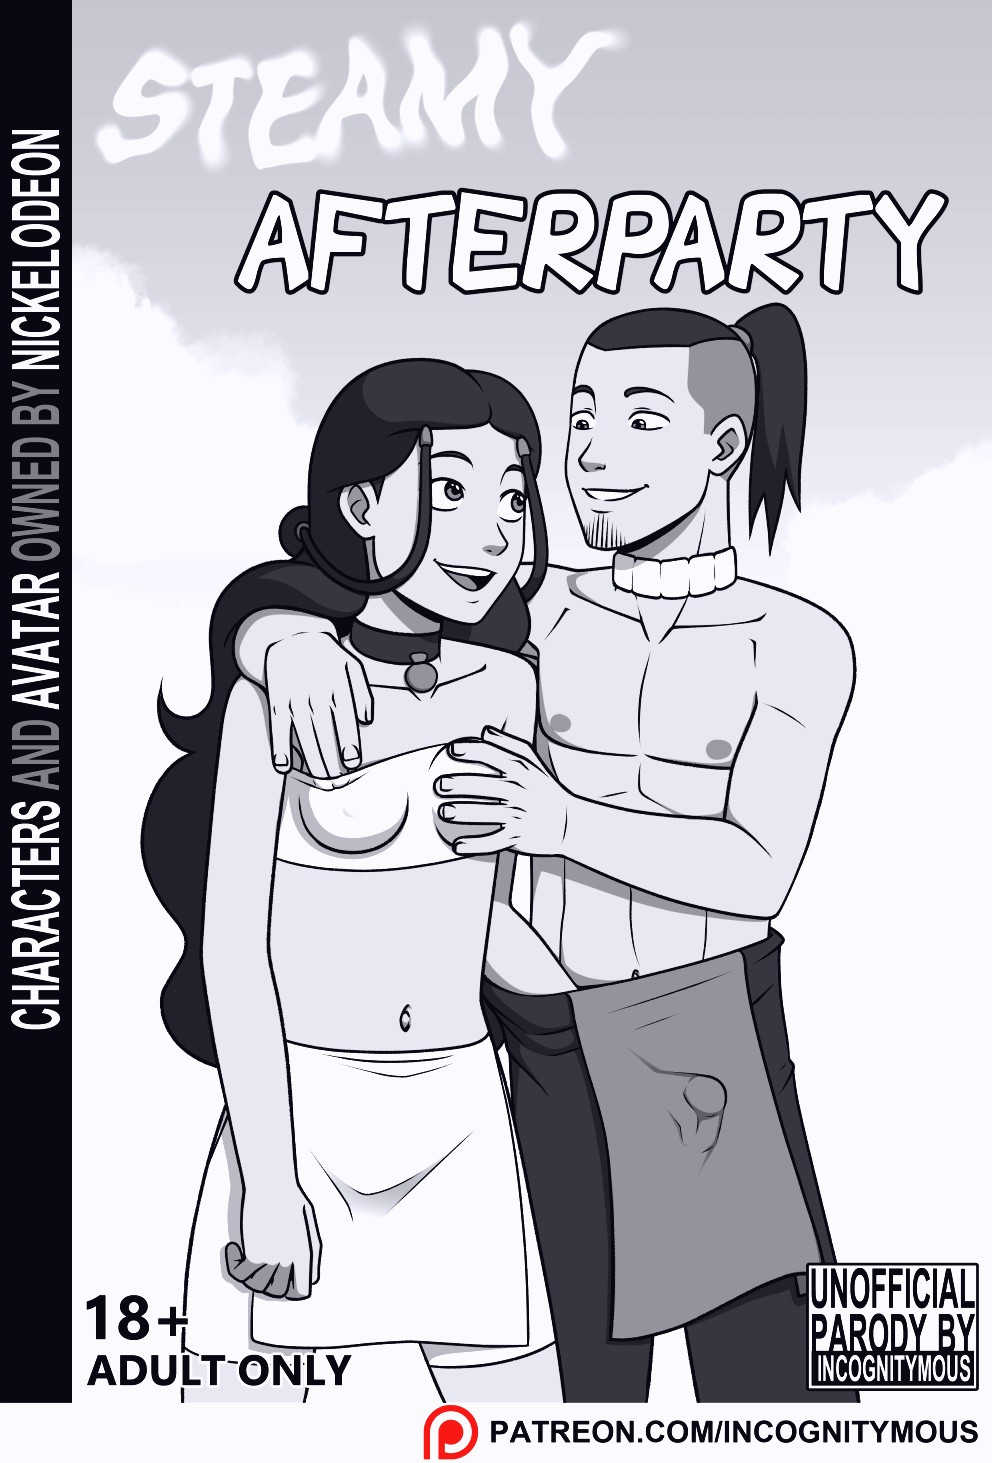 Steamy Afterparty porn comic page 001 on category Avatar: The Last Airbender